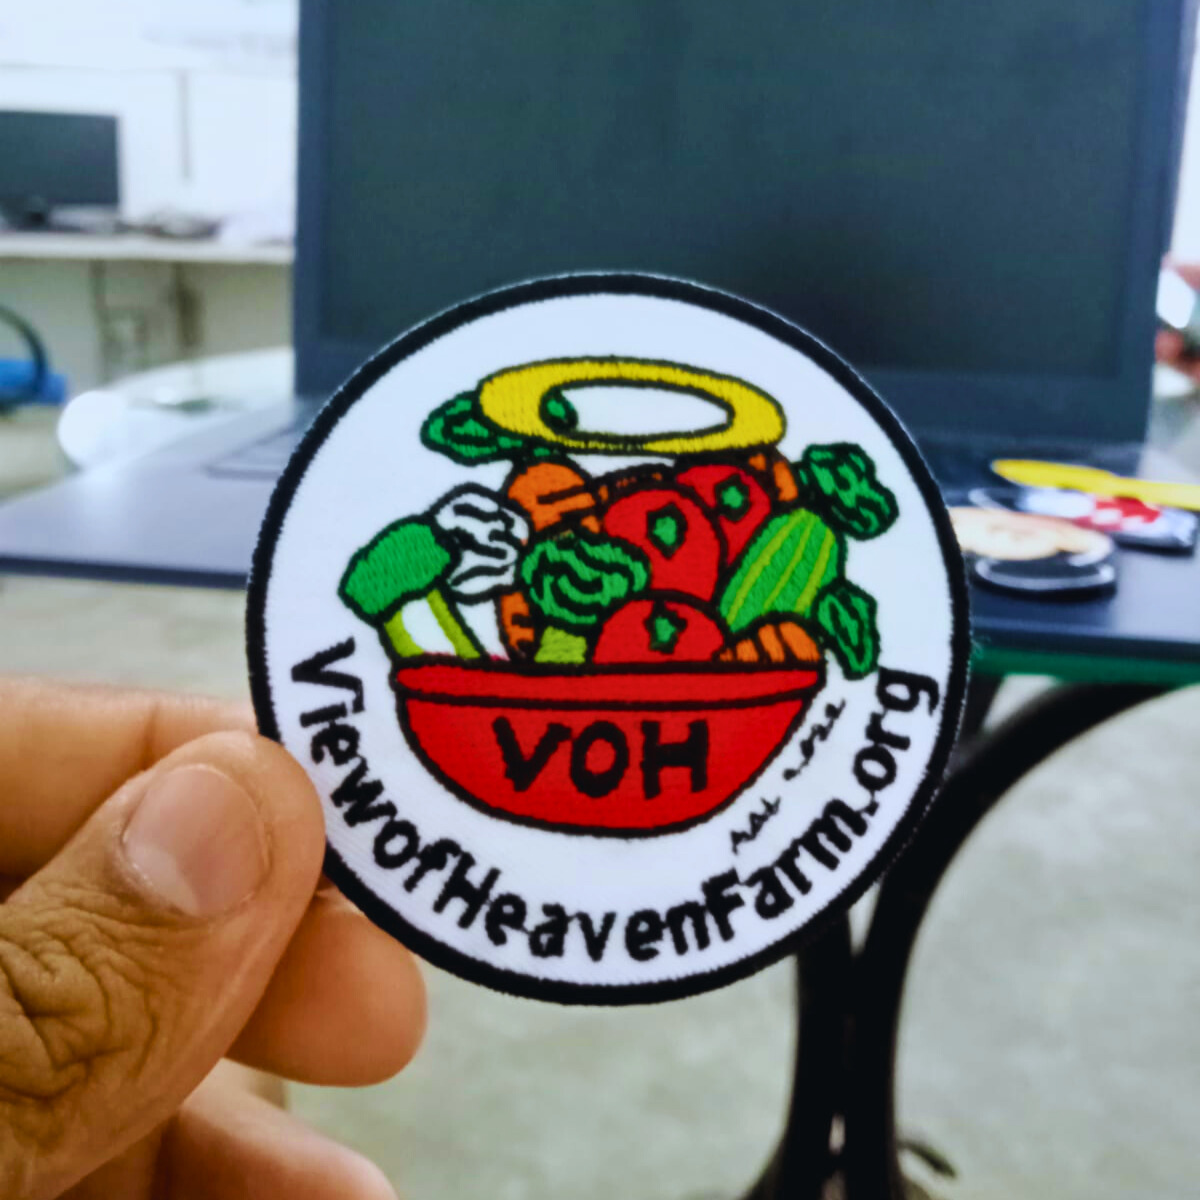 Custom Embroidered VOH View of Heaven Farm Patches.

Give us a call for all your apparel needs 
☎️ +1 323 902 5939
📧 email us at info@popularpunch.com

#popularpunch #embroidered #embroideredart #embroidery #embroider #customembroideredpatches #etsy #etsyshop #etsyseller #voh